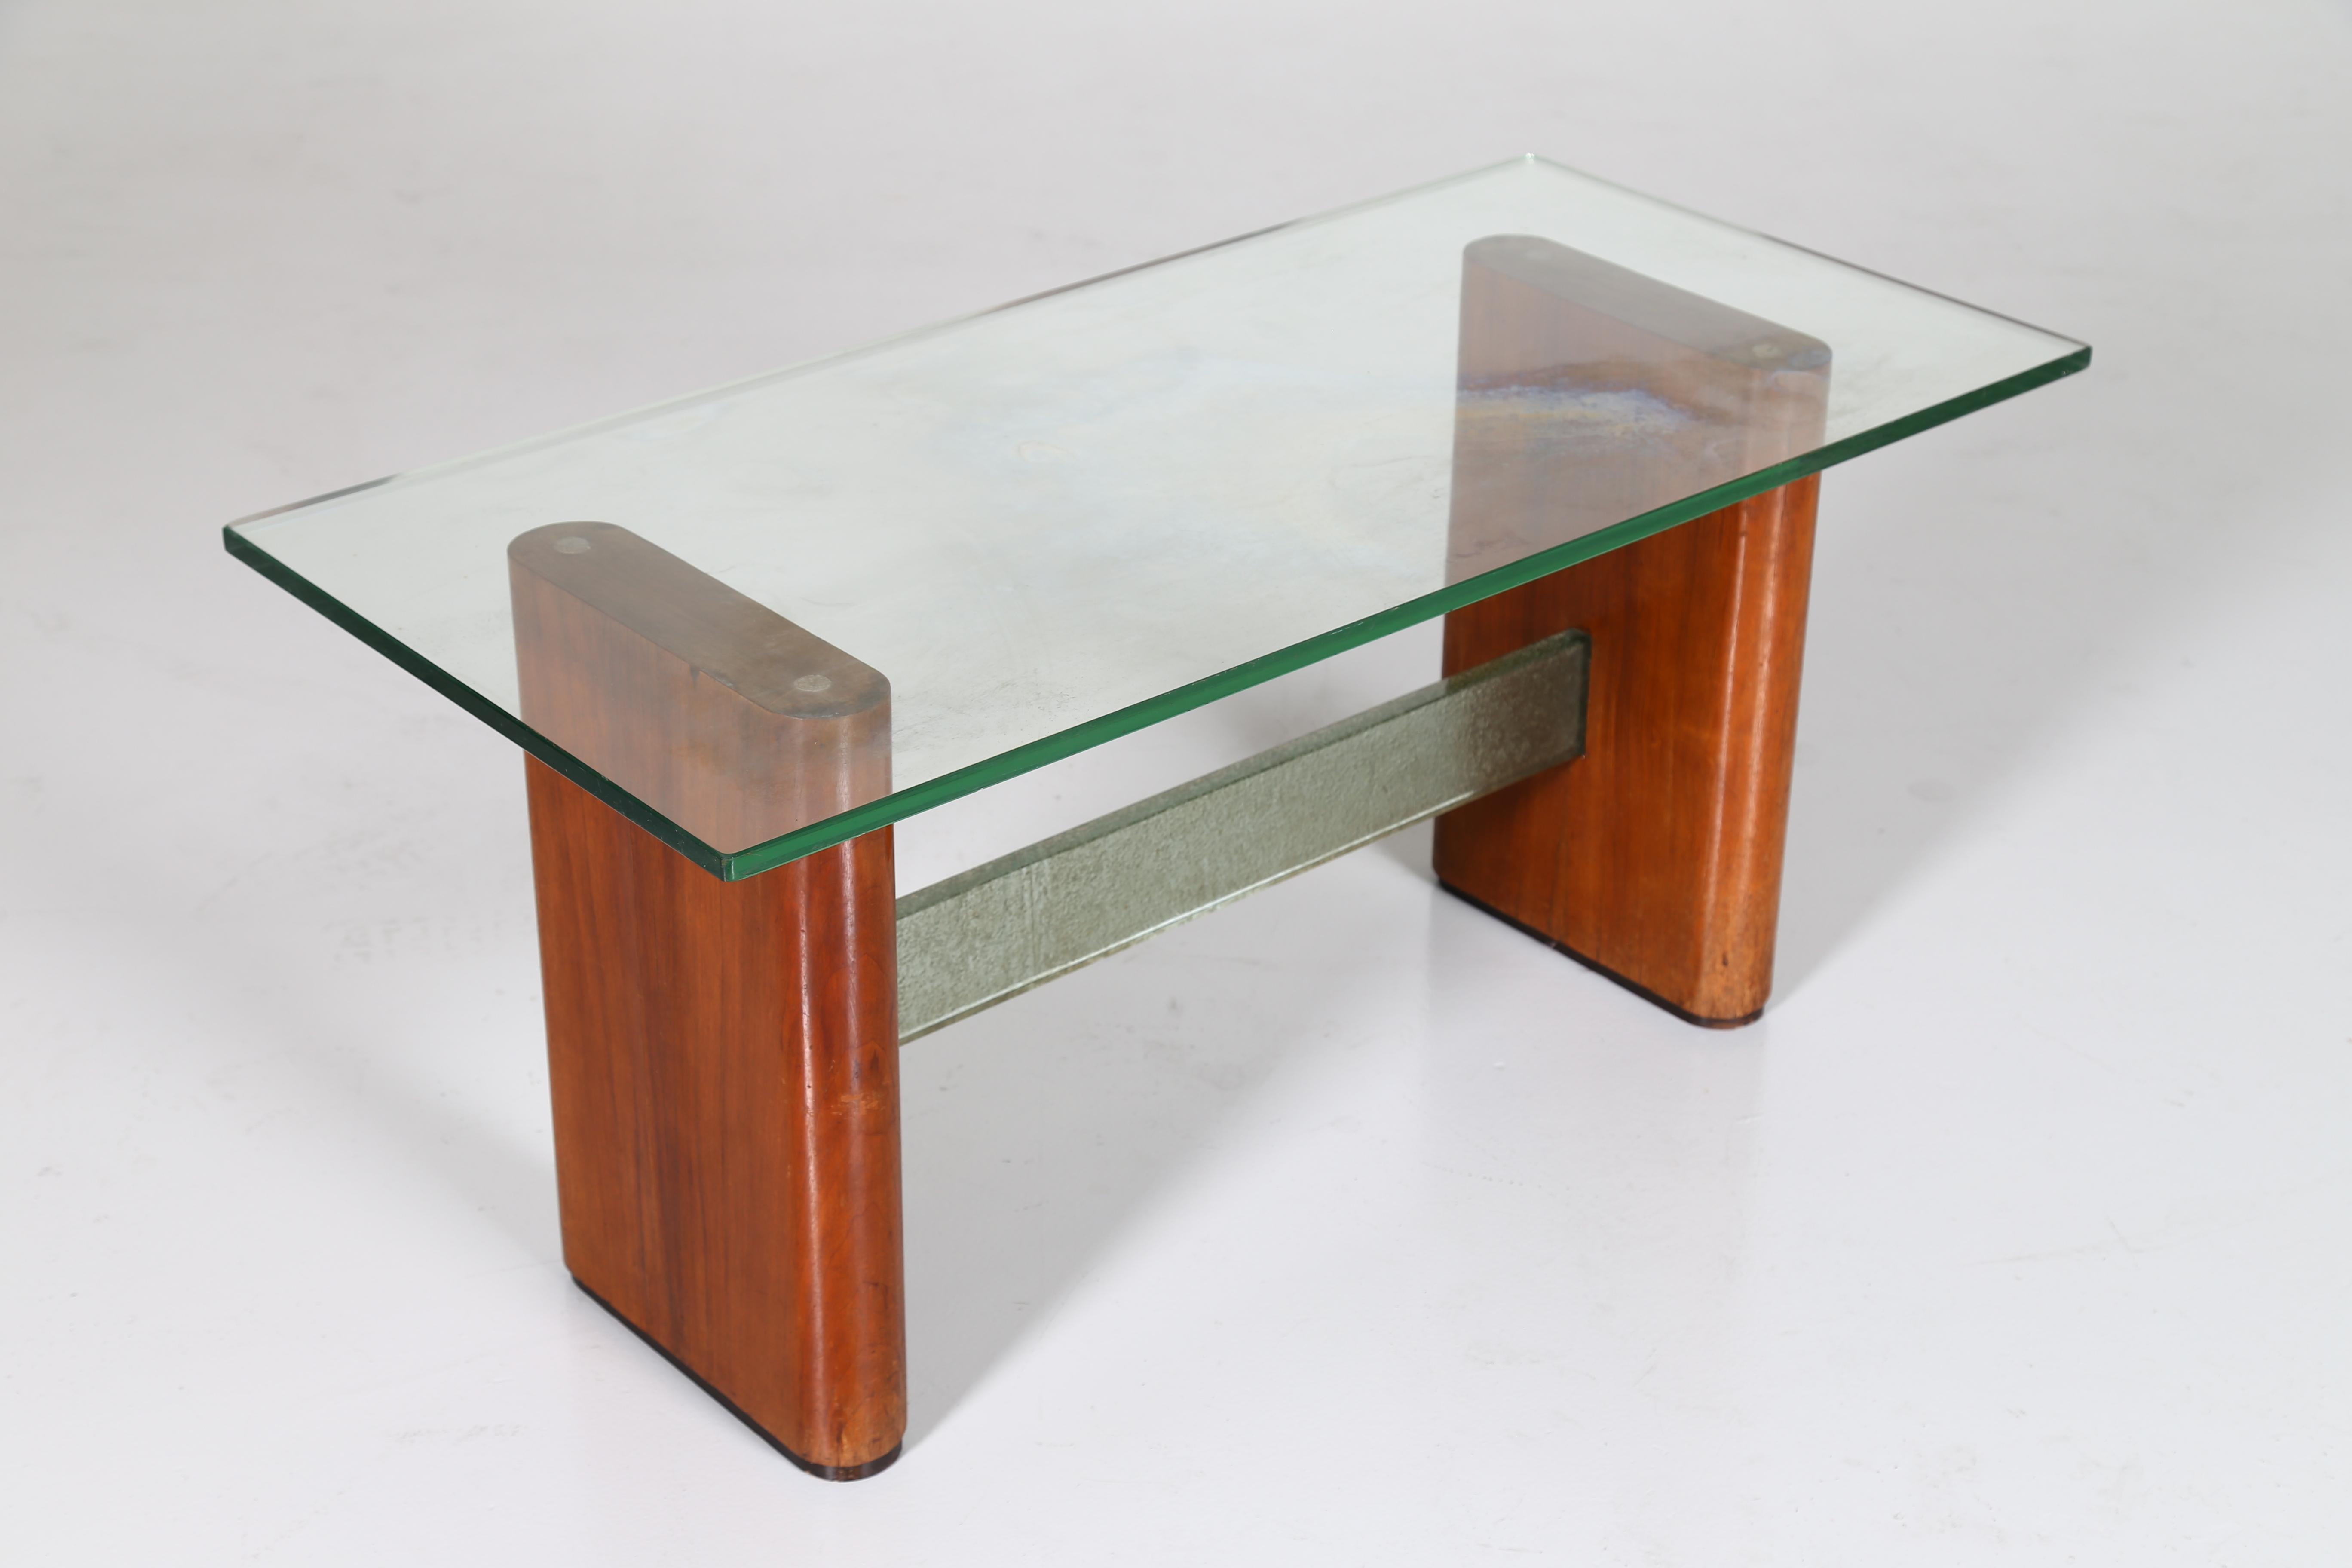 Italian Fontana Arte Attributed Midcentury Coffee Table in Glass and Wood, 1950s